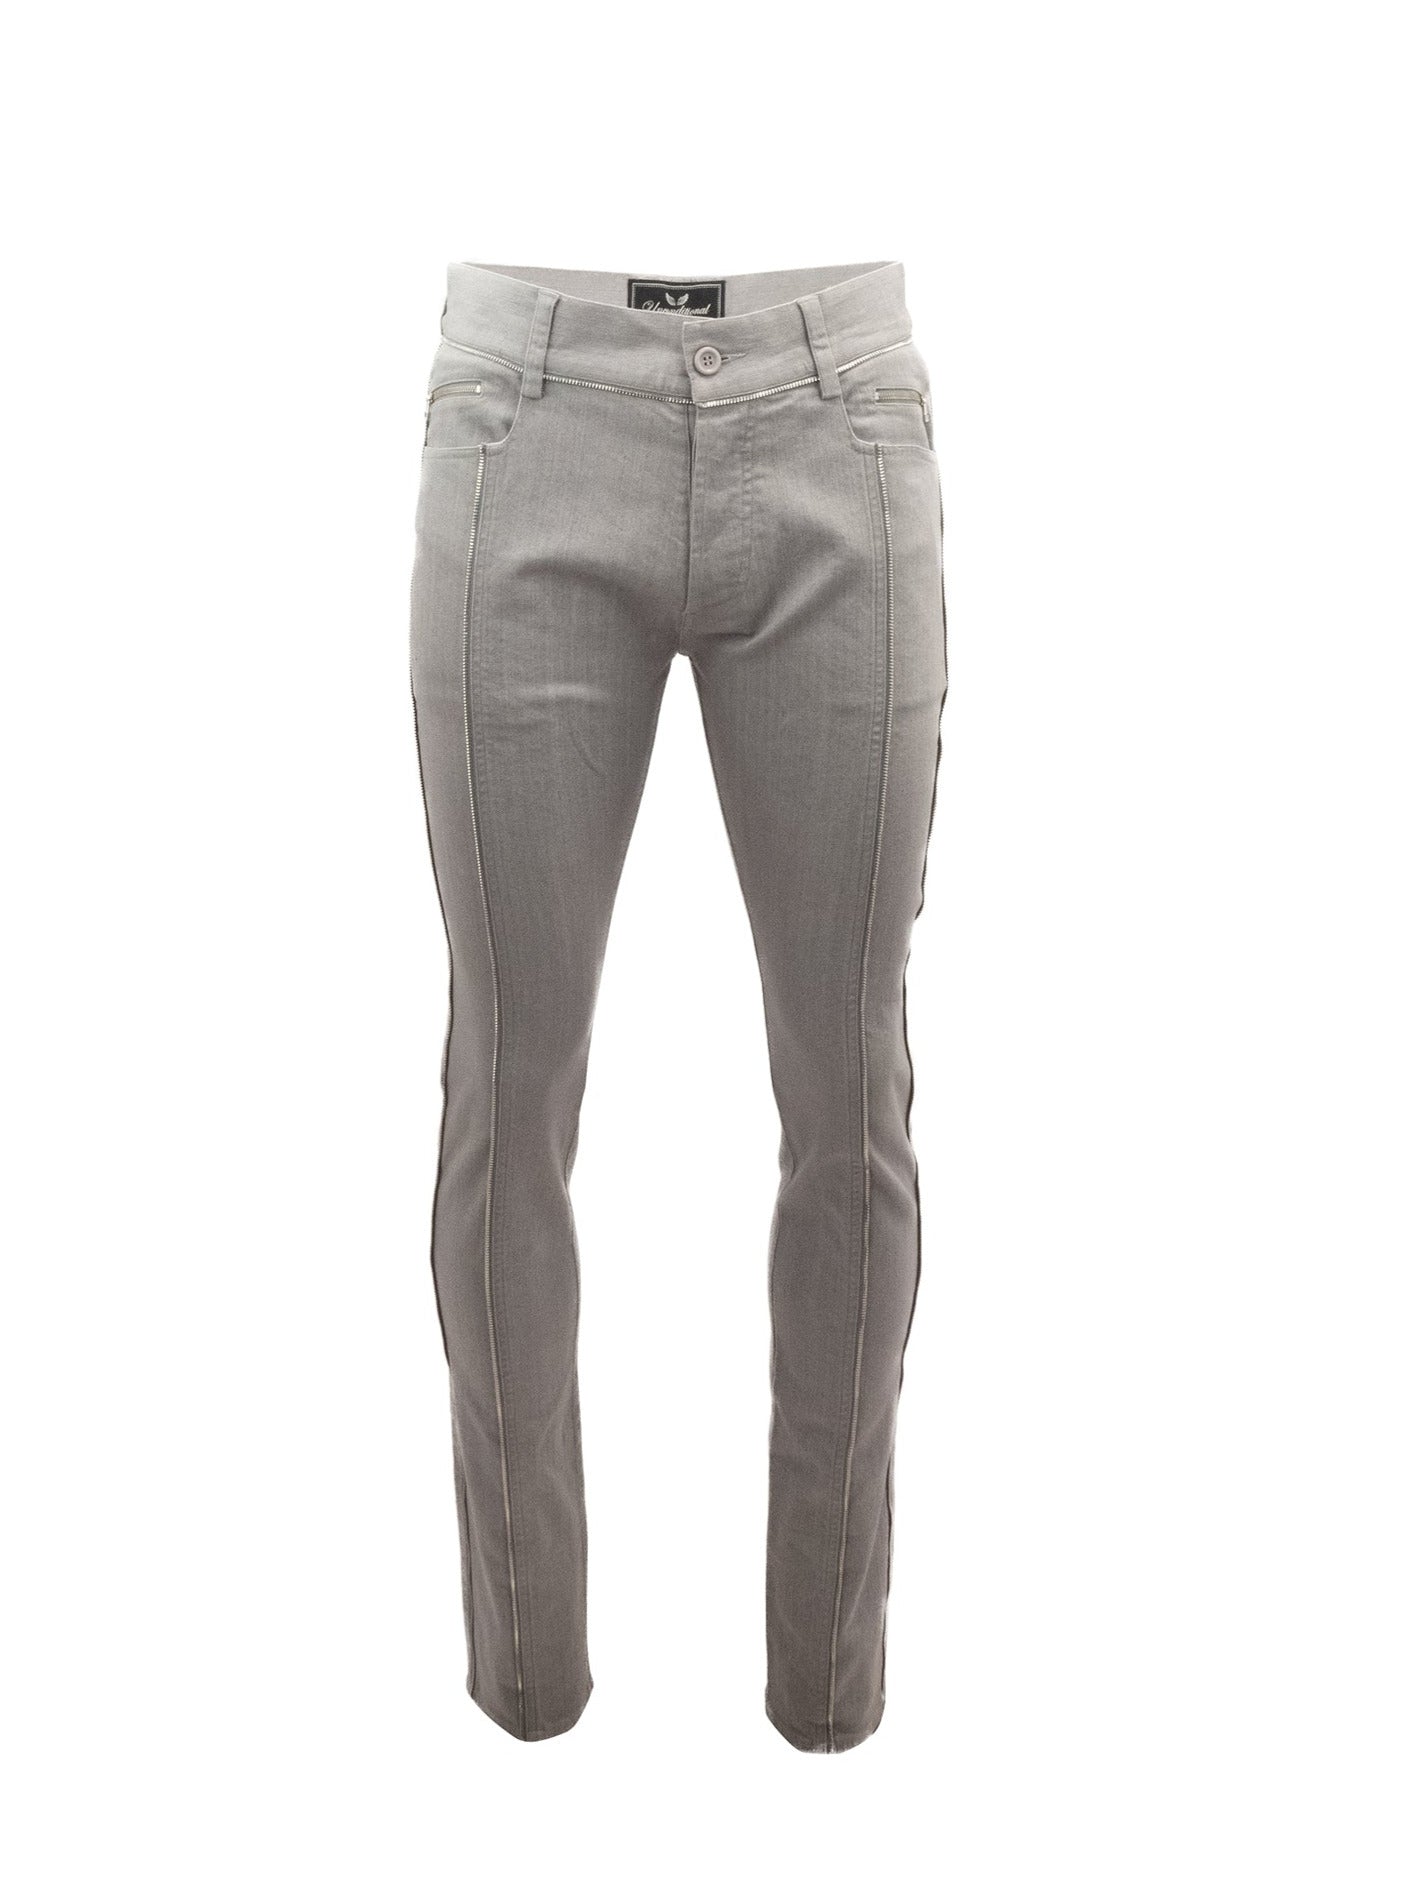 LIGHT GREY JEANS WITH SILVER ZIPS